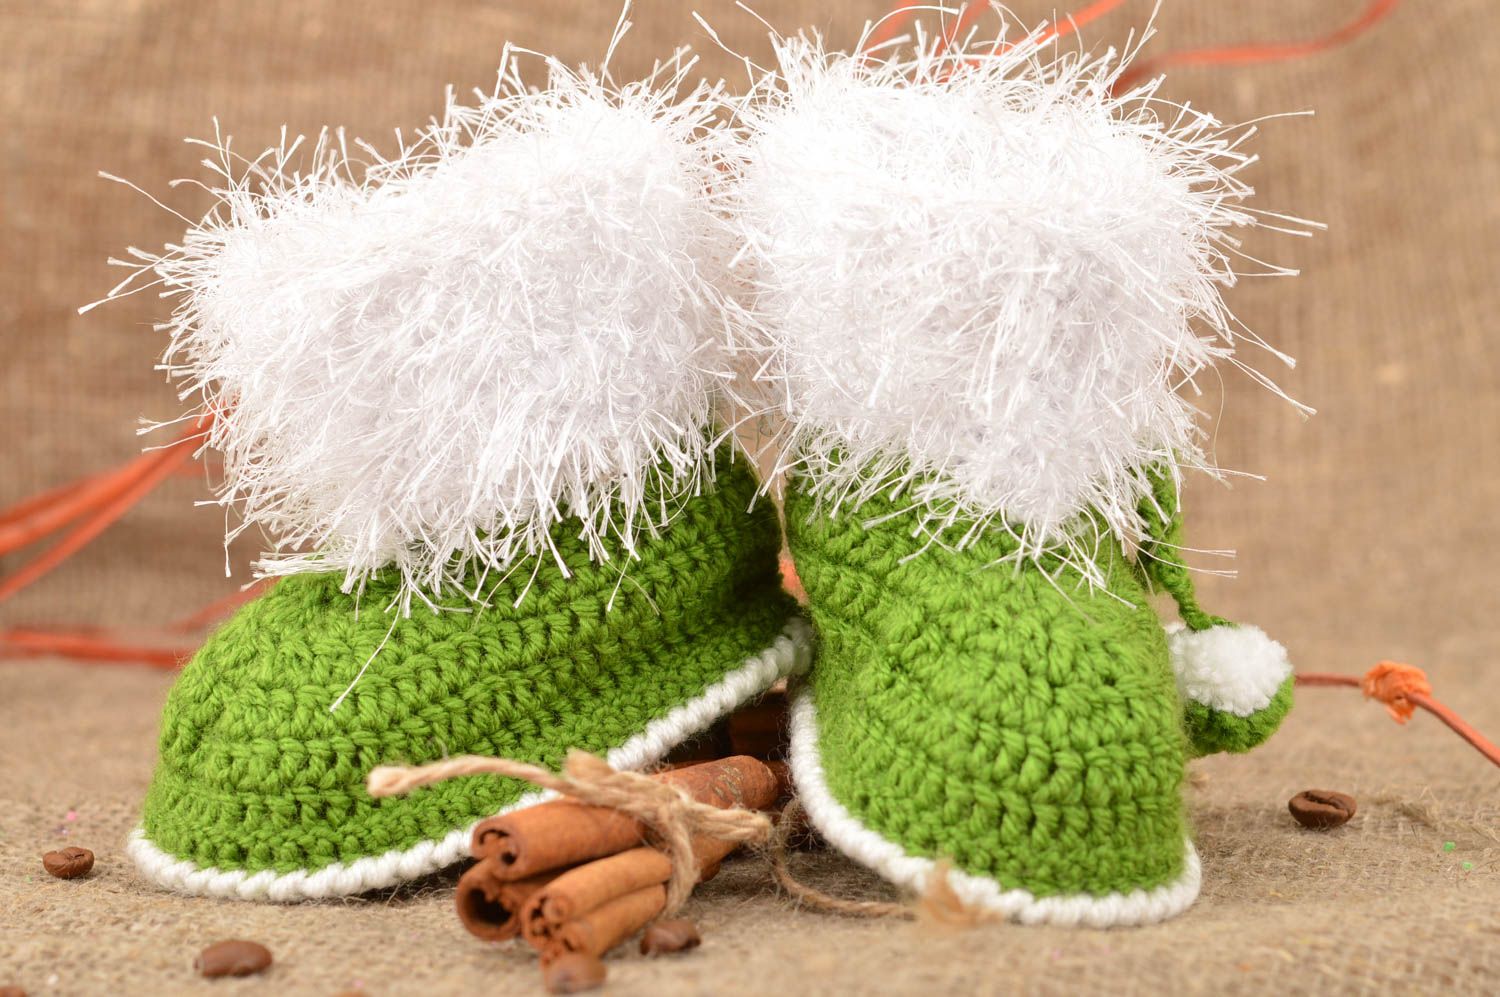 Crocheted designer cute green handmade baby bootees made of acrylics for boys photo 1